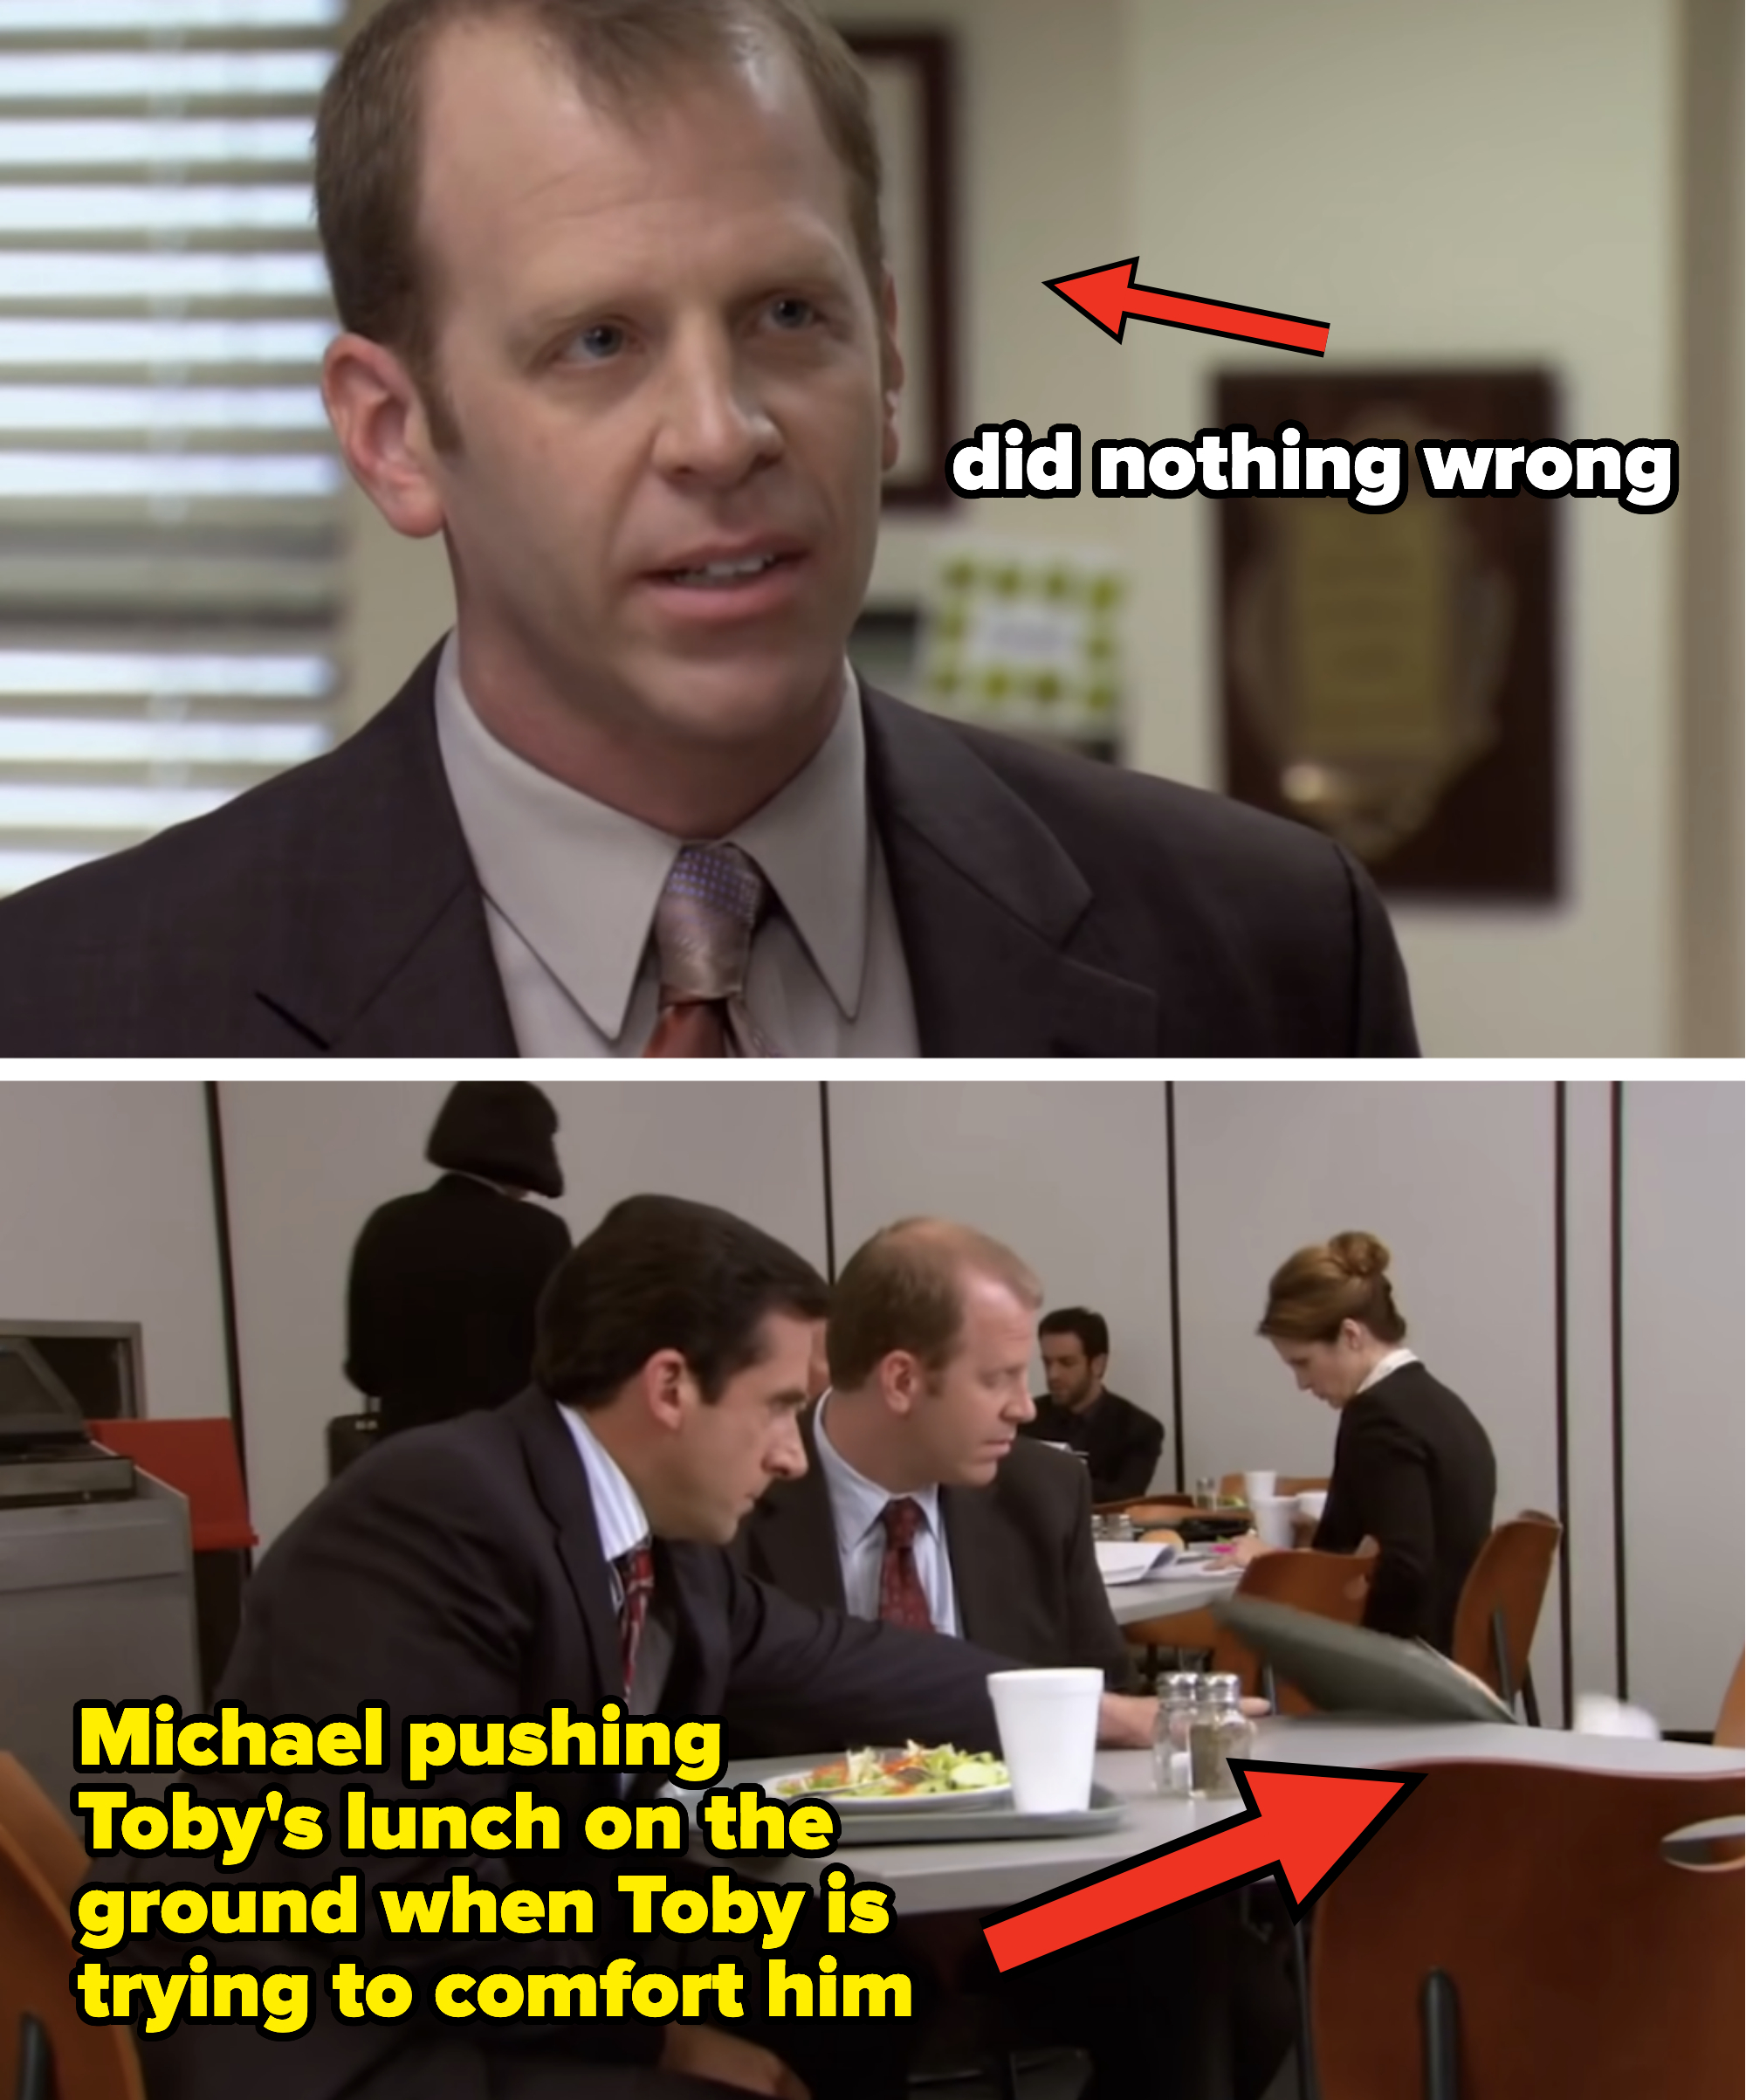 michael pushing toby's lunch on the ground